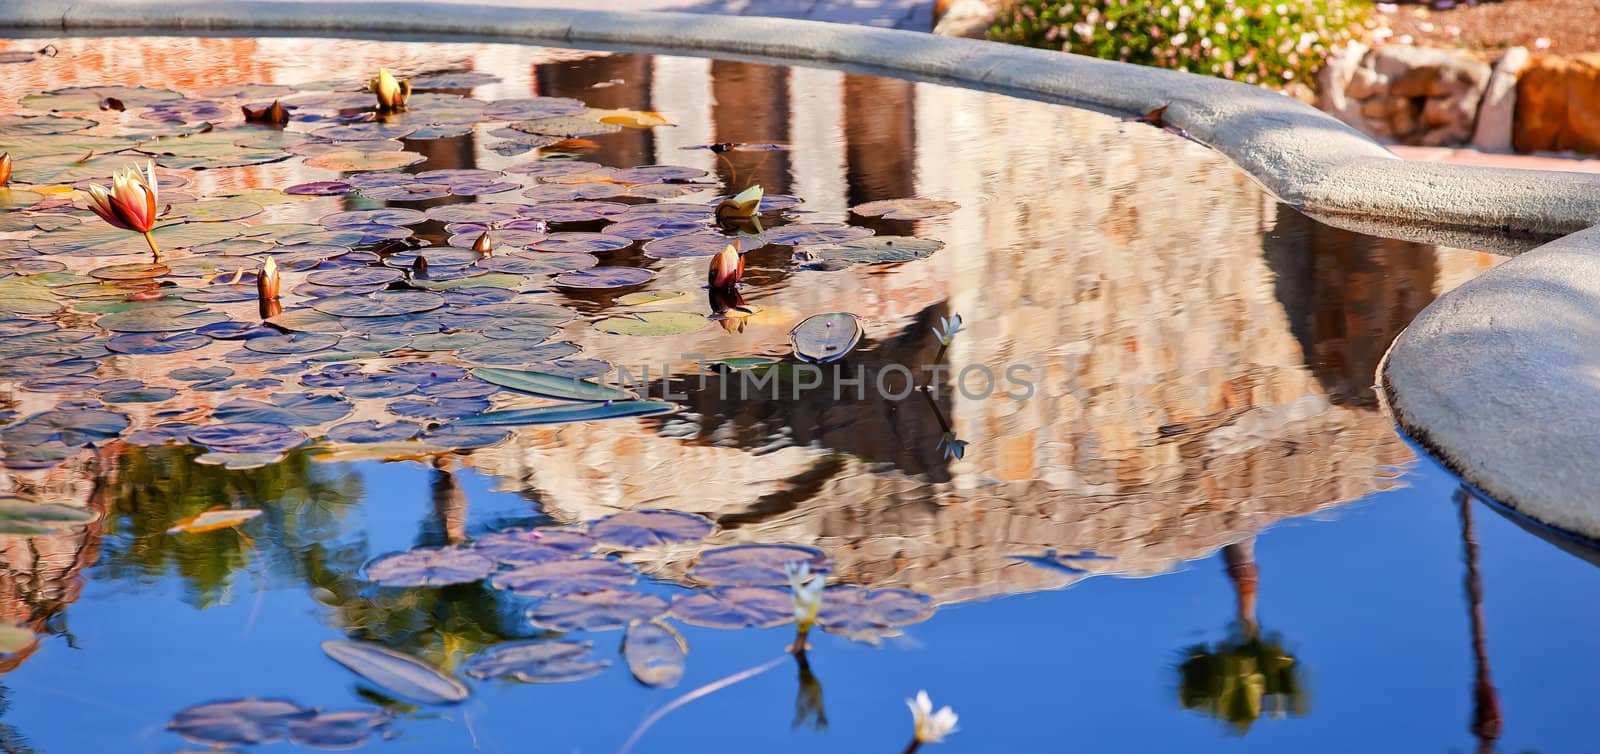 Fountain Pool Reflection Abstract Mission San Juan Capistrano Ca by bill_perry